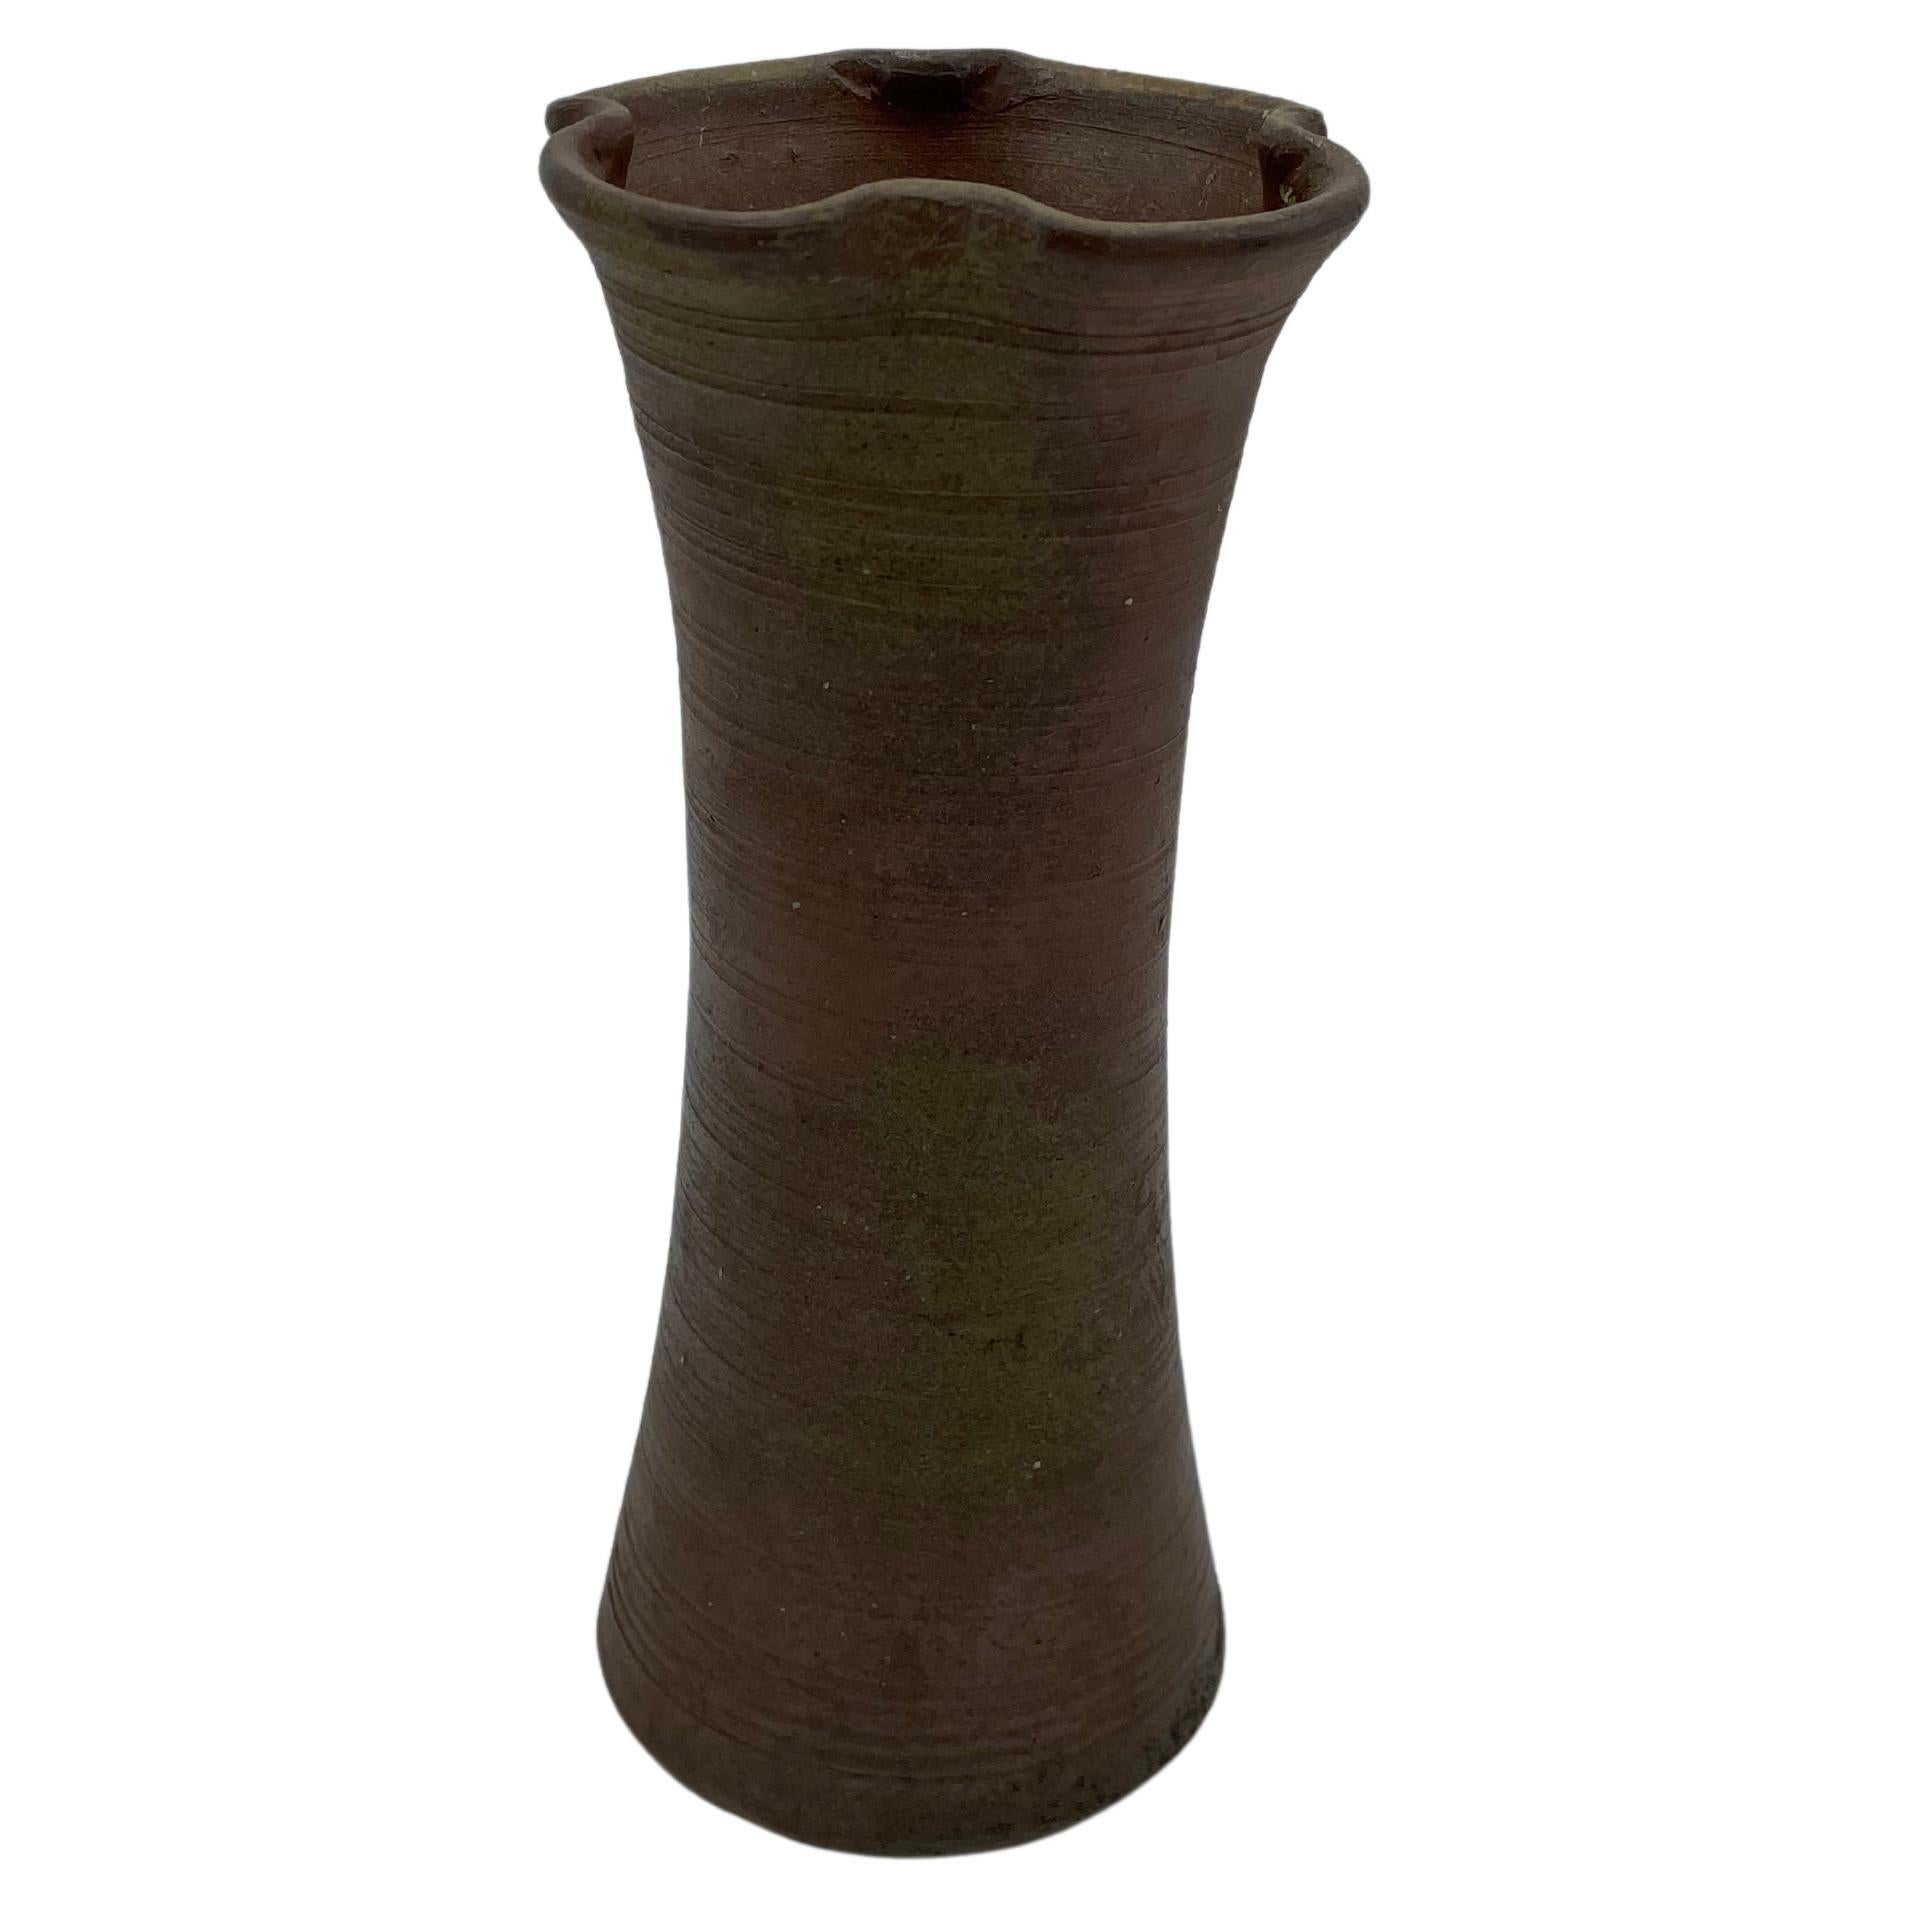 This is an antique flower vase made in Japan around 1970s.
The style of technique is Bizen ware (Bizen-yaki).

Bizen yaki is a type of Japanese pottery traditionally from Bizen province, presently a part of Okayama prefecture.
Bizen yaki has a